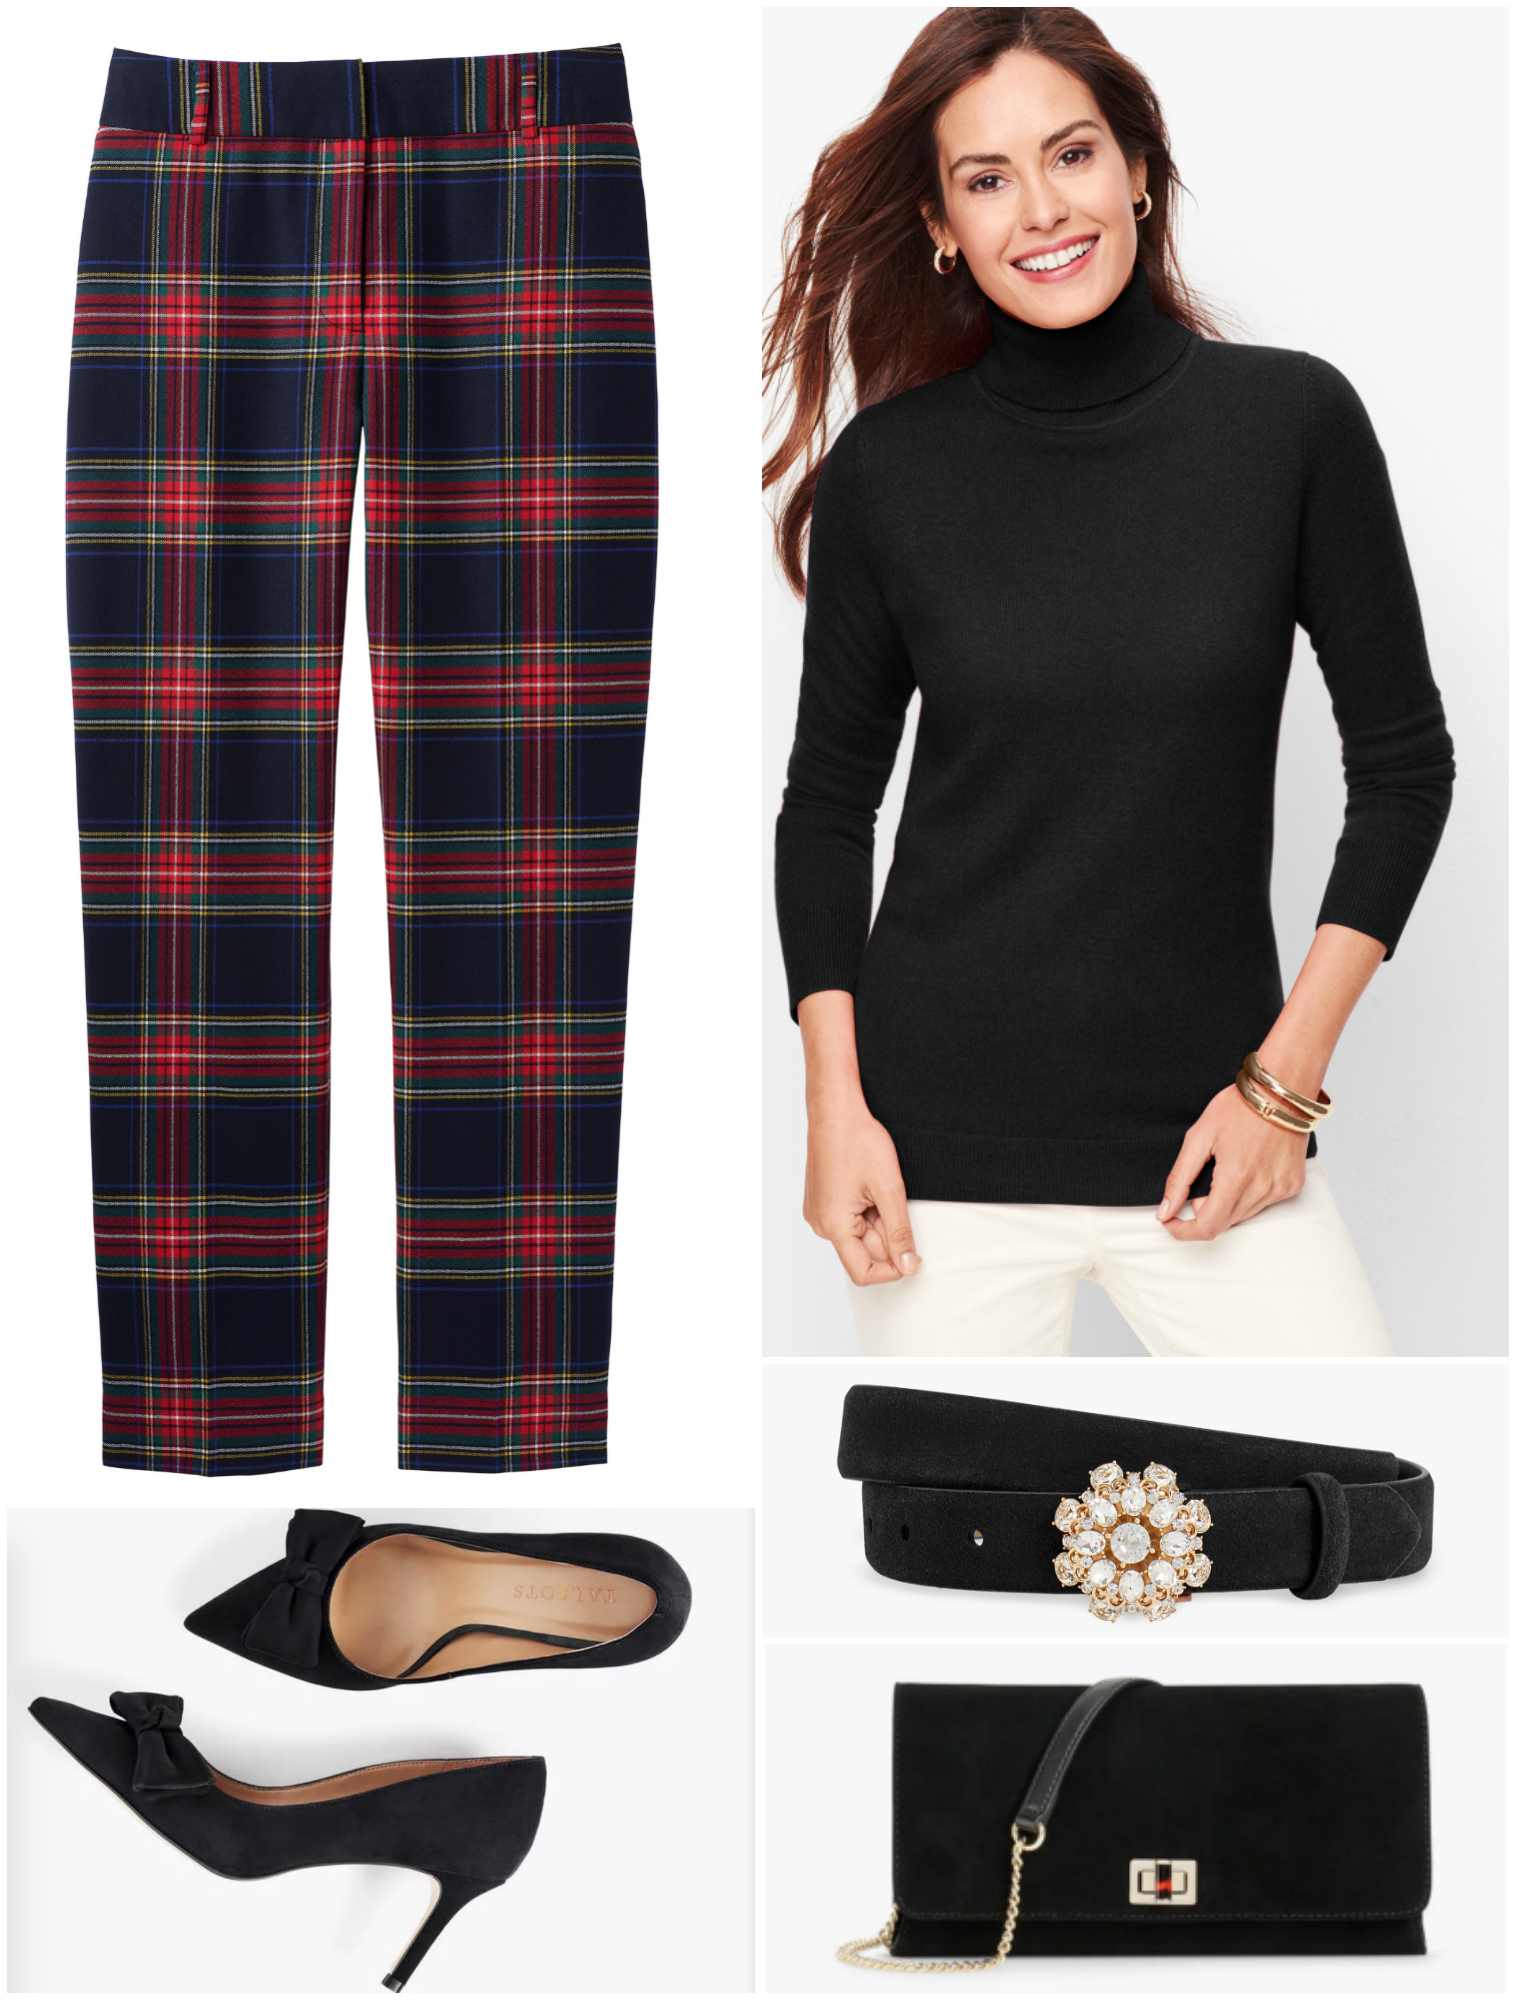 Pumps and a sparkly belt glam up a cashmere turtleneck and plaid ankle pants for a holiday party at a friend's house or at the office.